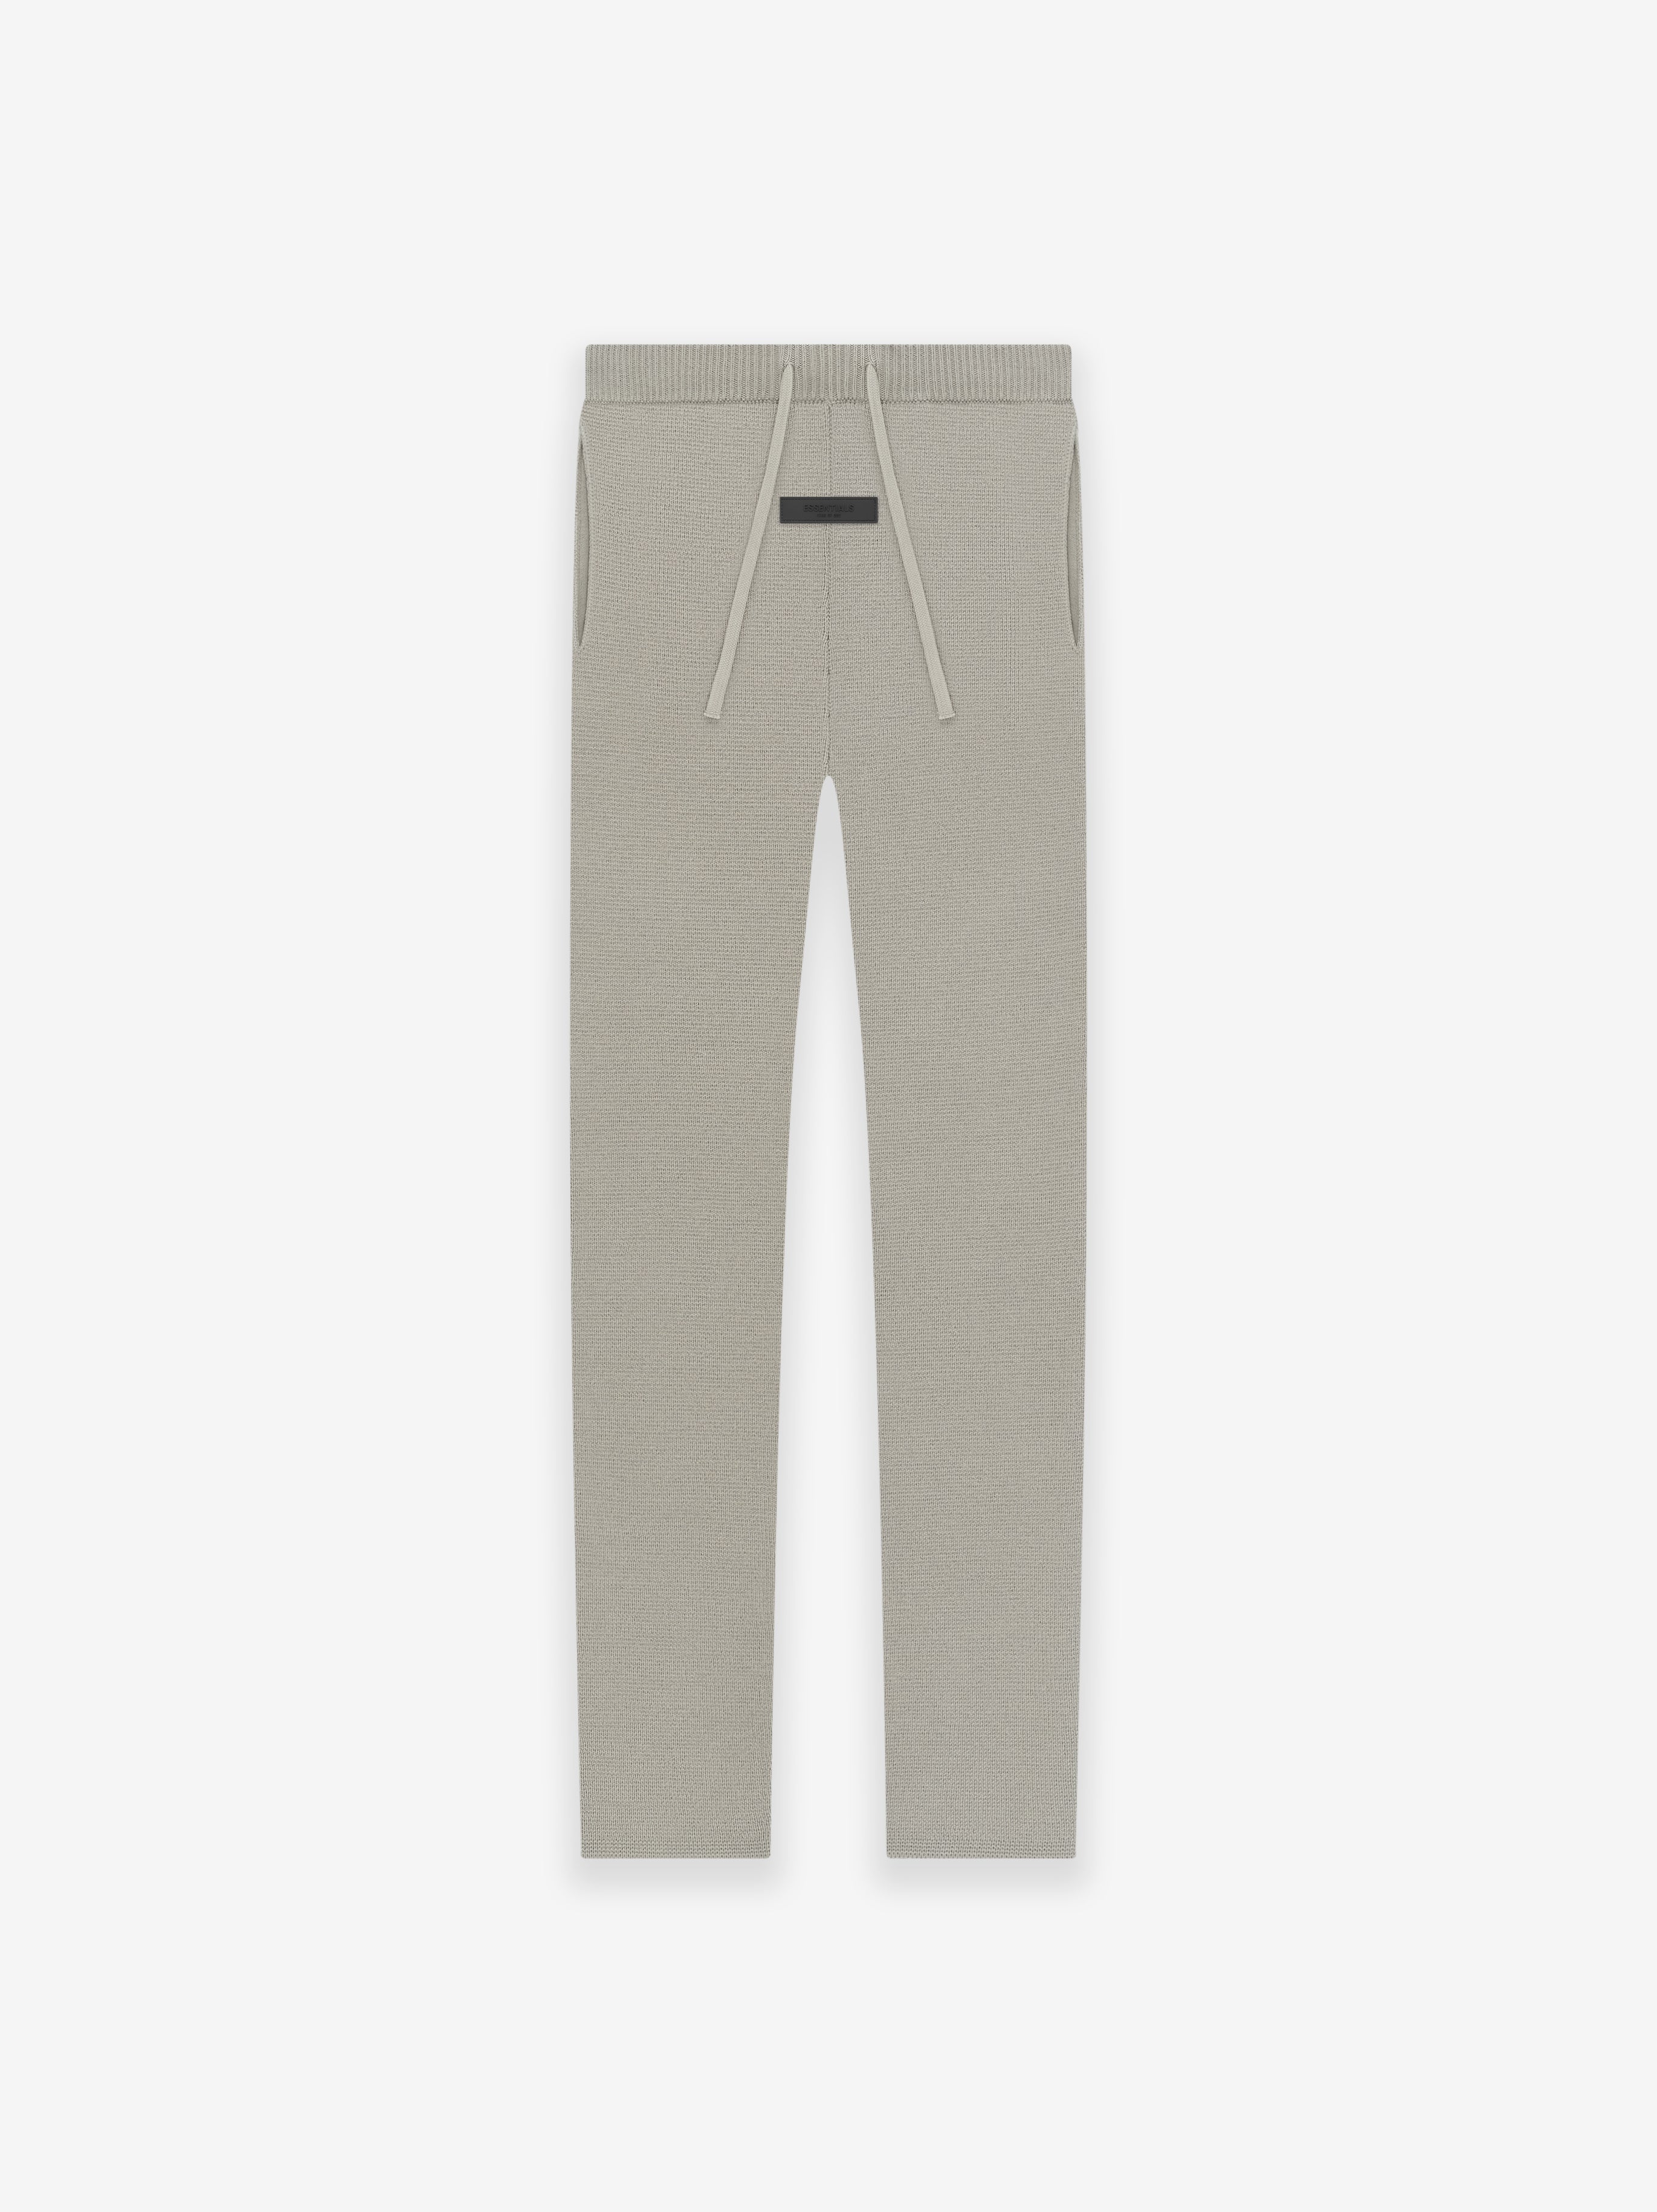 ESSENTIALS Womens Knit Lounge Pant in Seal | Fear of God